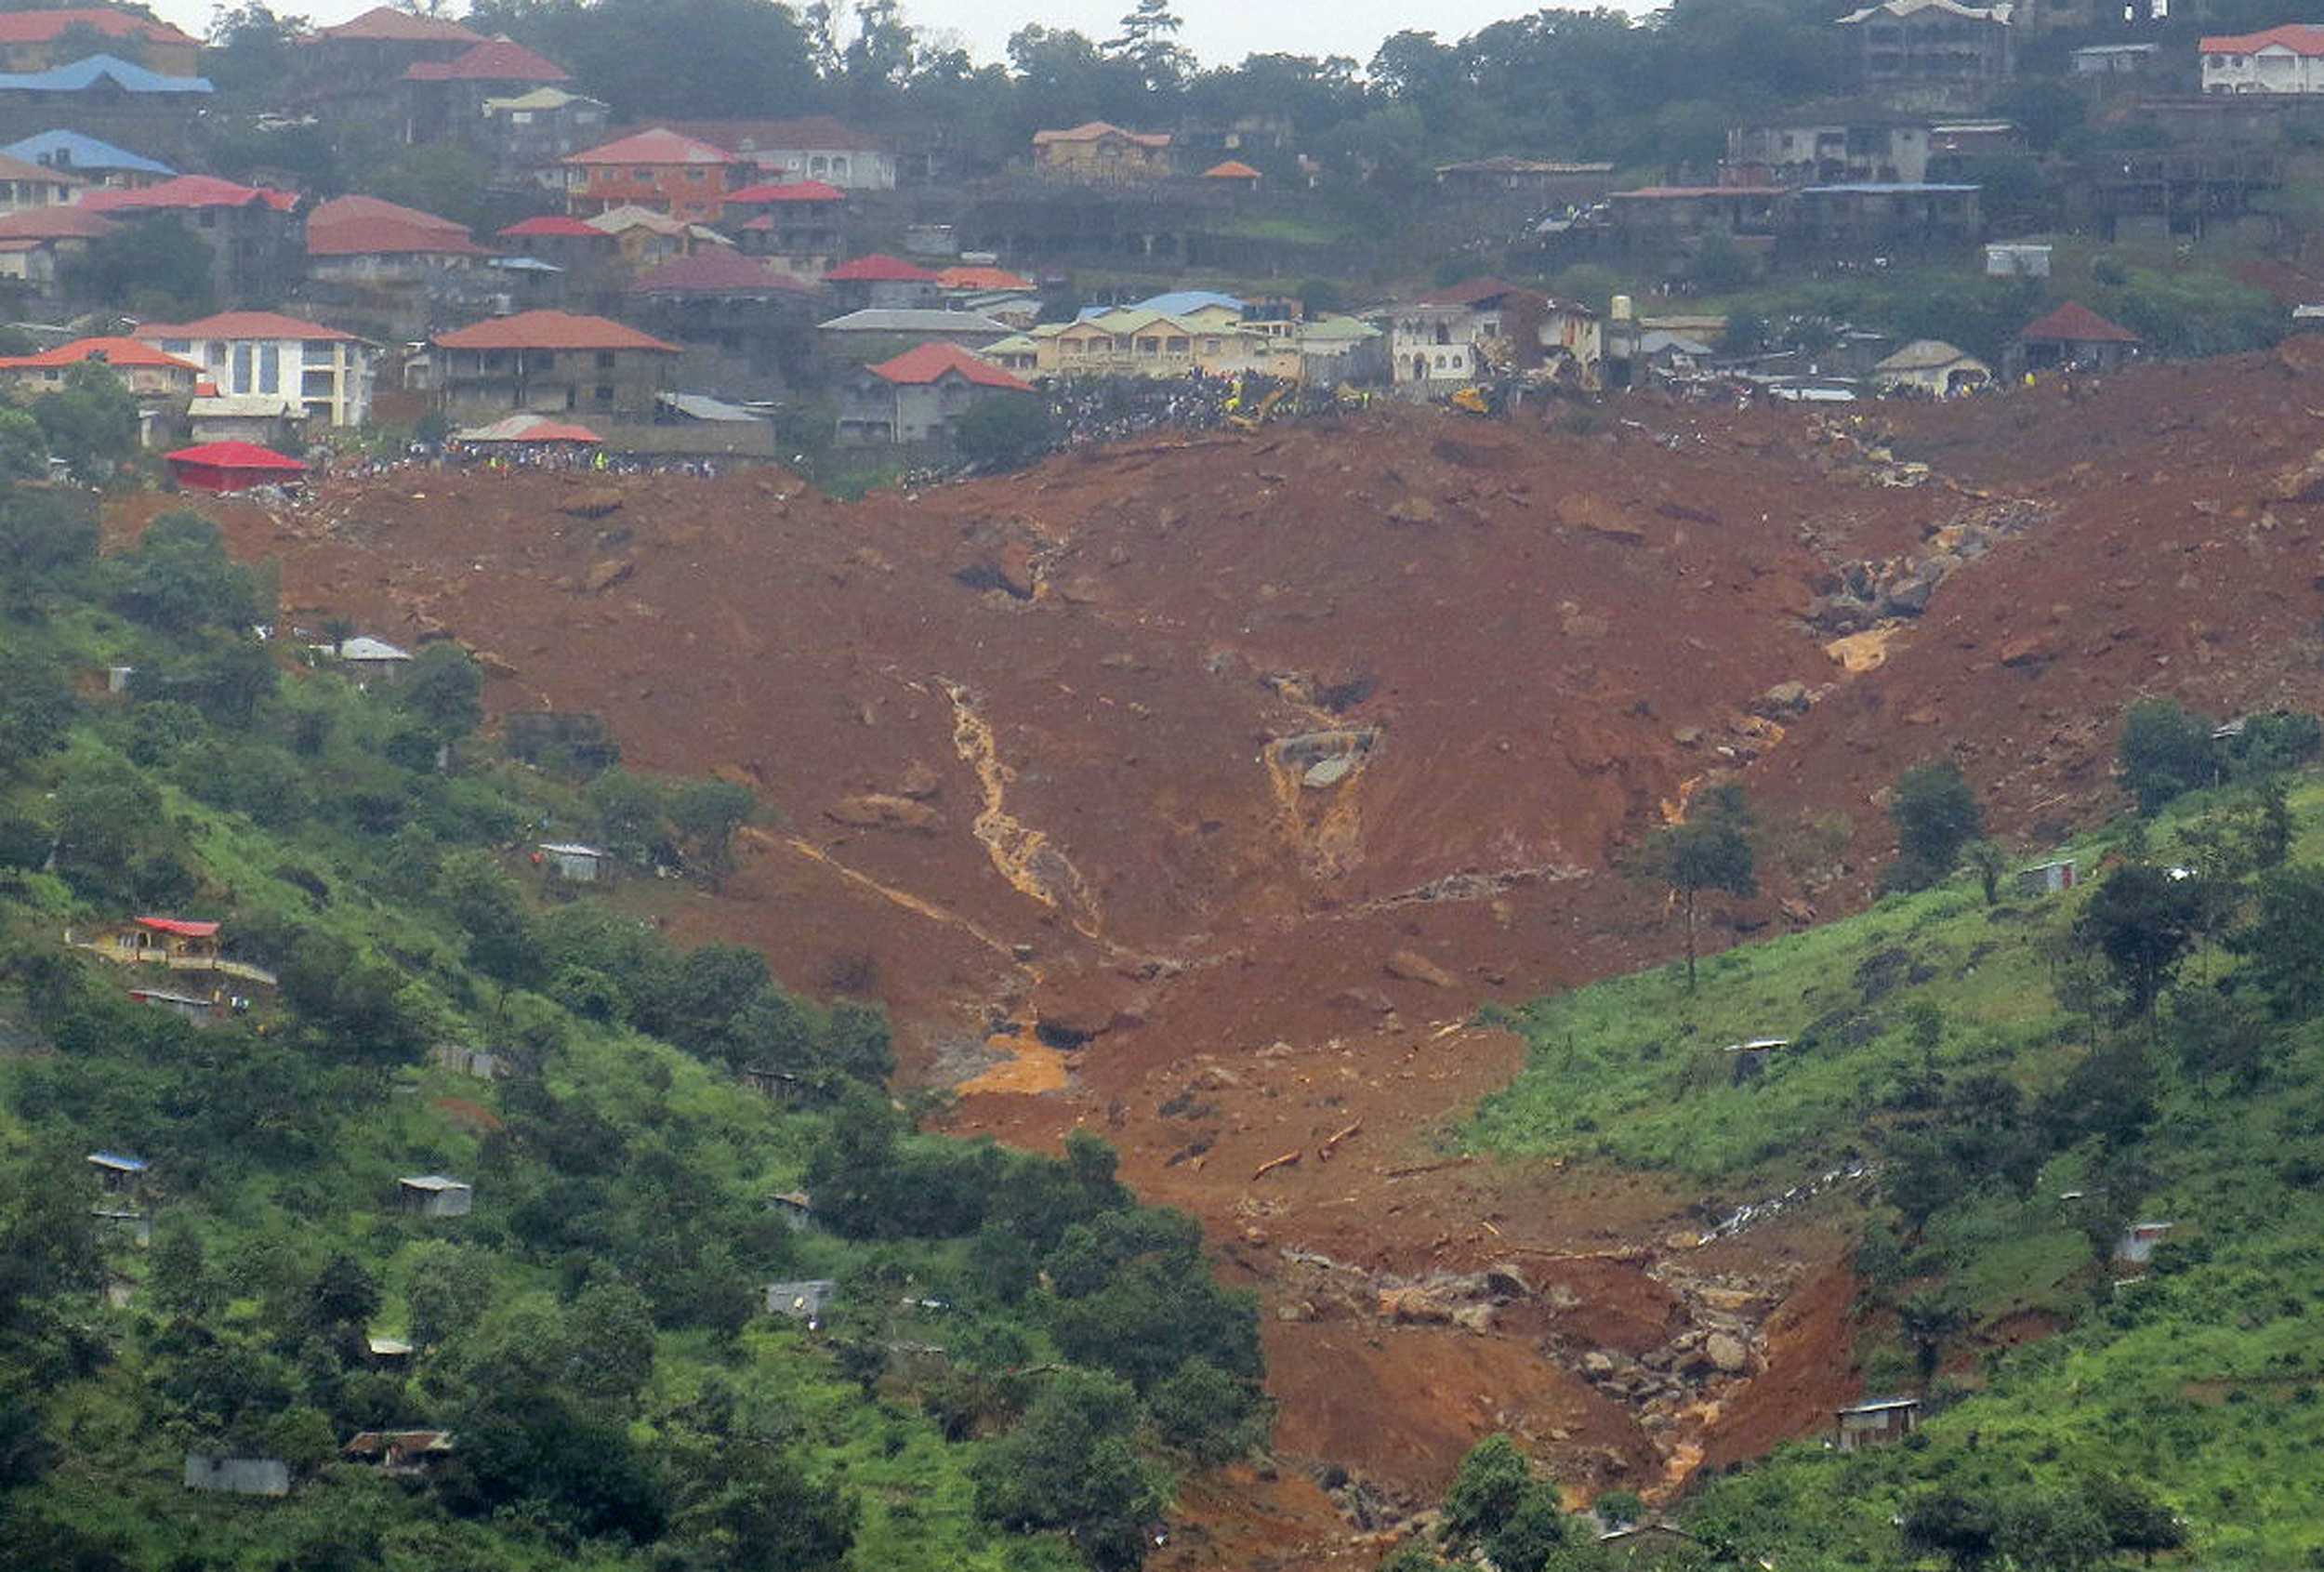 At least 300 dead, 600 missing after Sierra Leone mudslides 'swallowed entire communities'